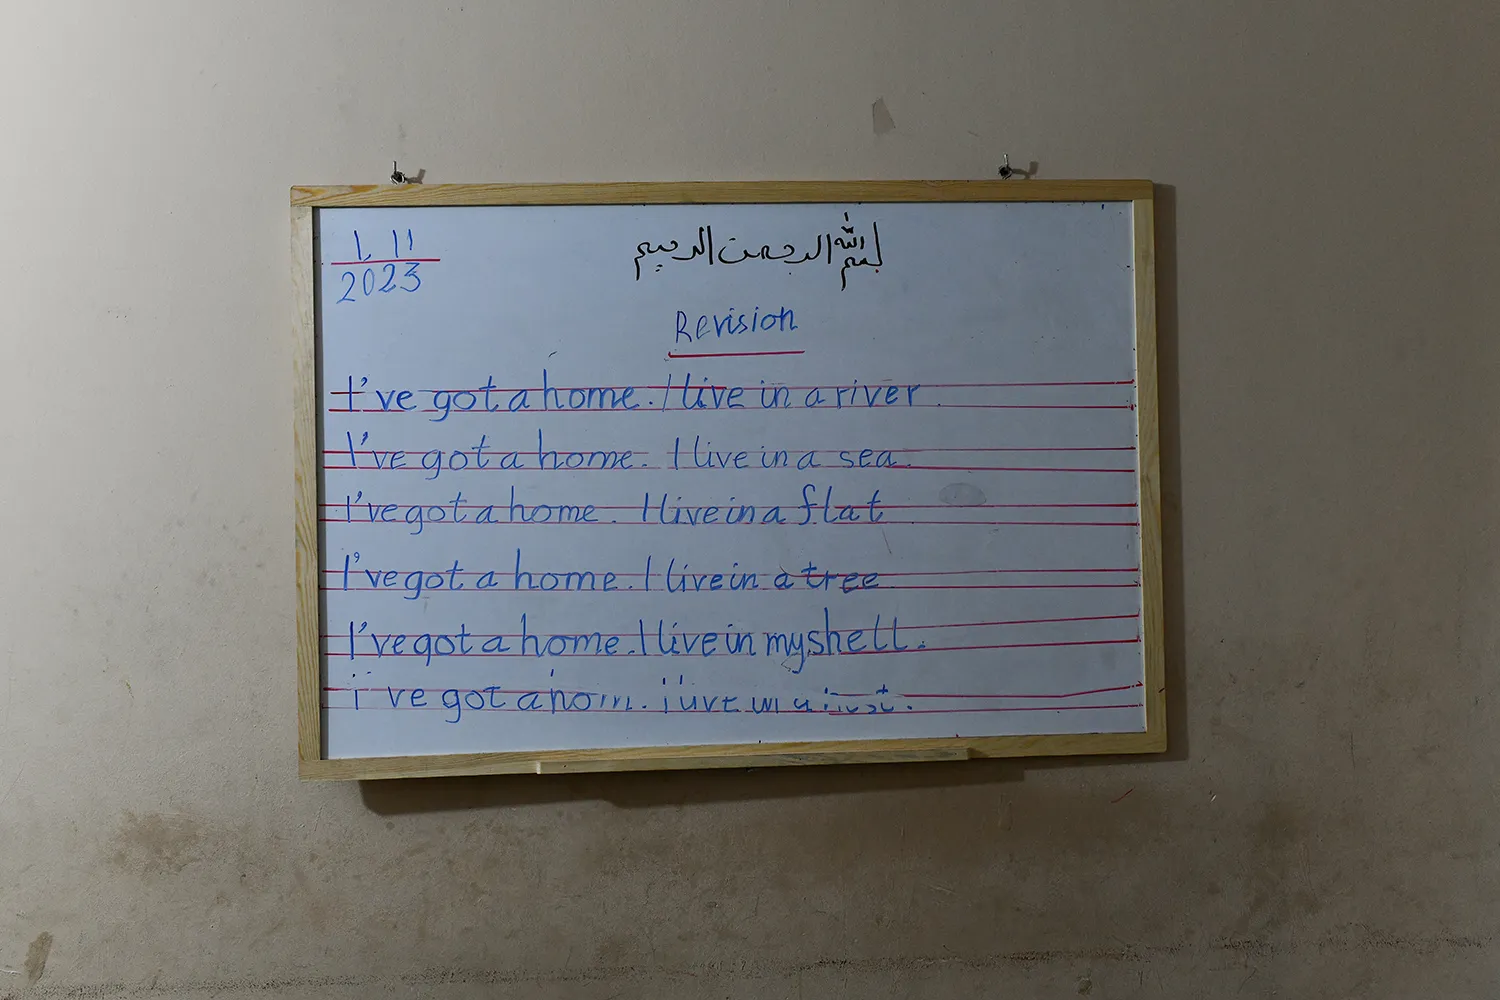 A whiteboard at the school run by the Hopes for the Future initiative in Cairo.